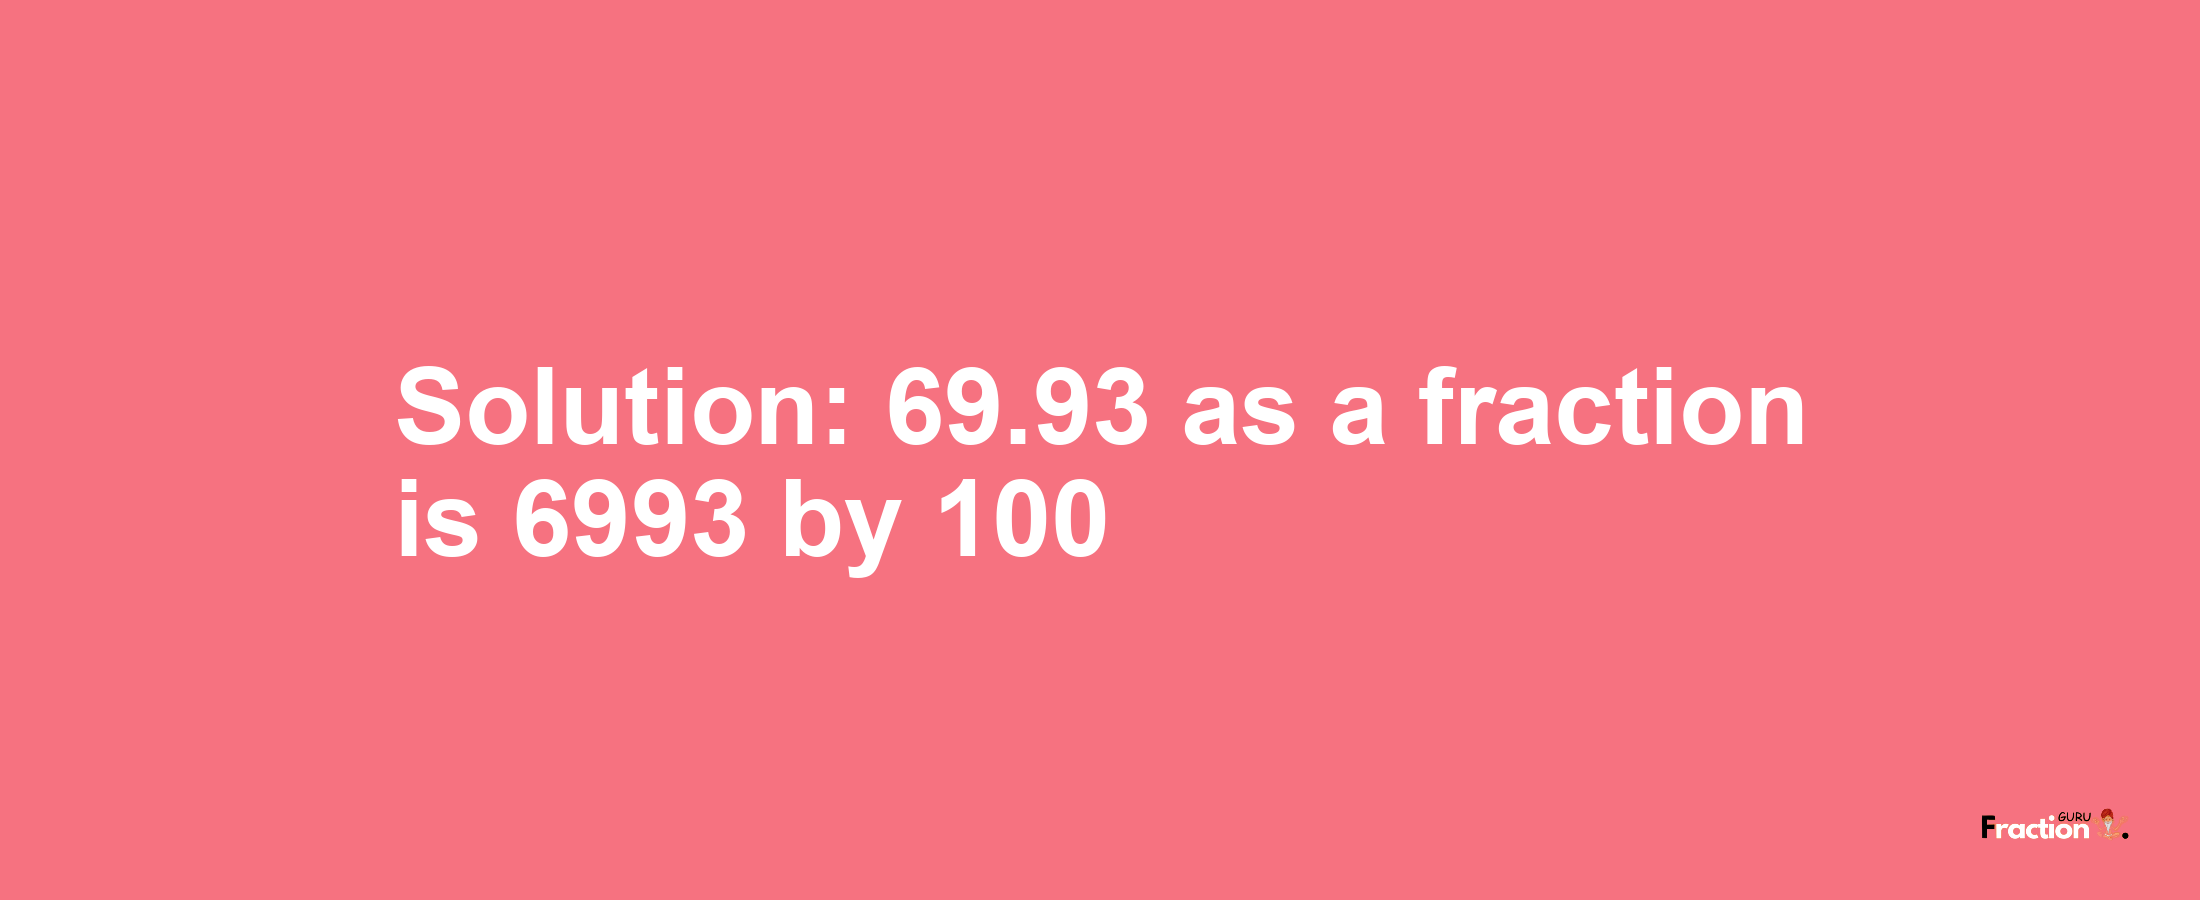 Solution:69.93 as a fraction is 6993/100